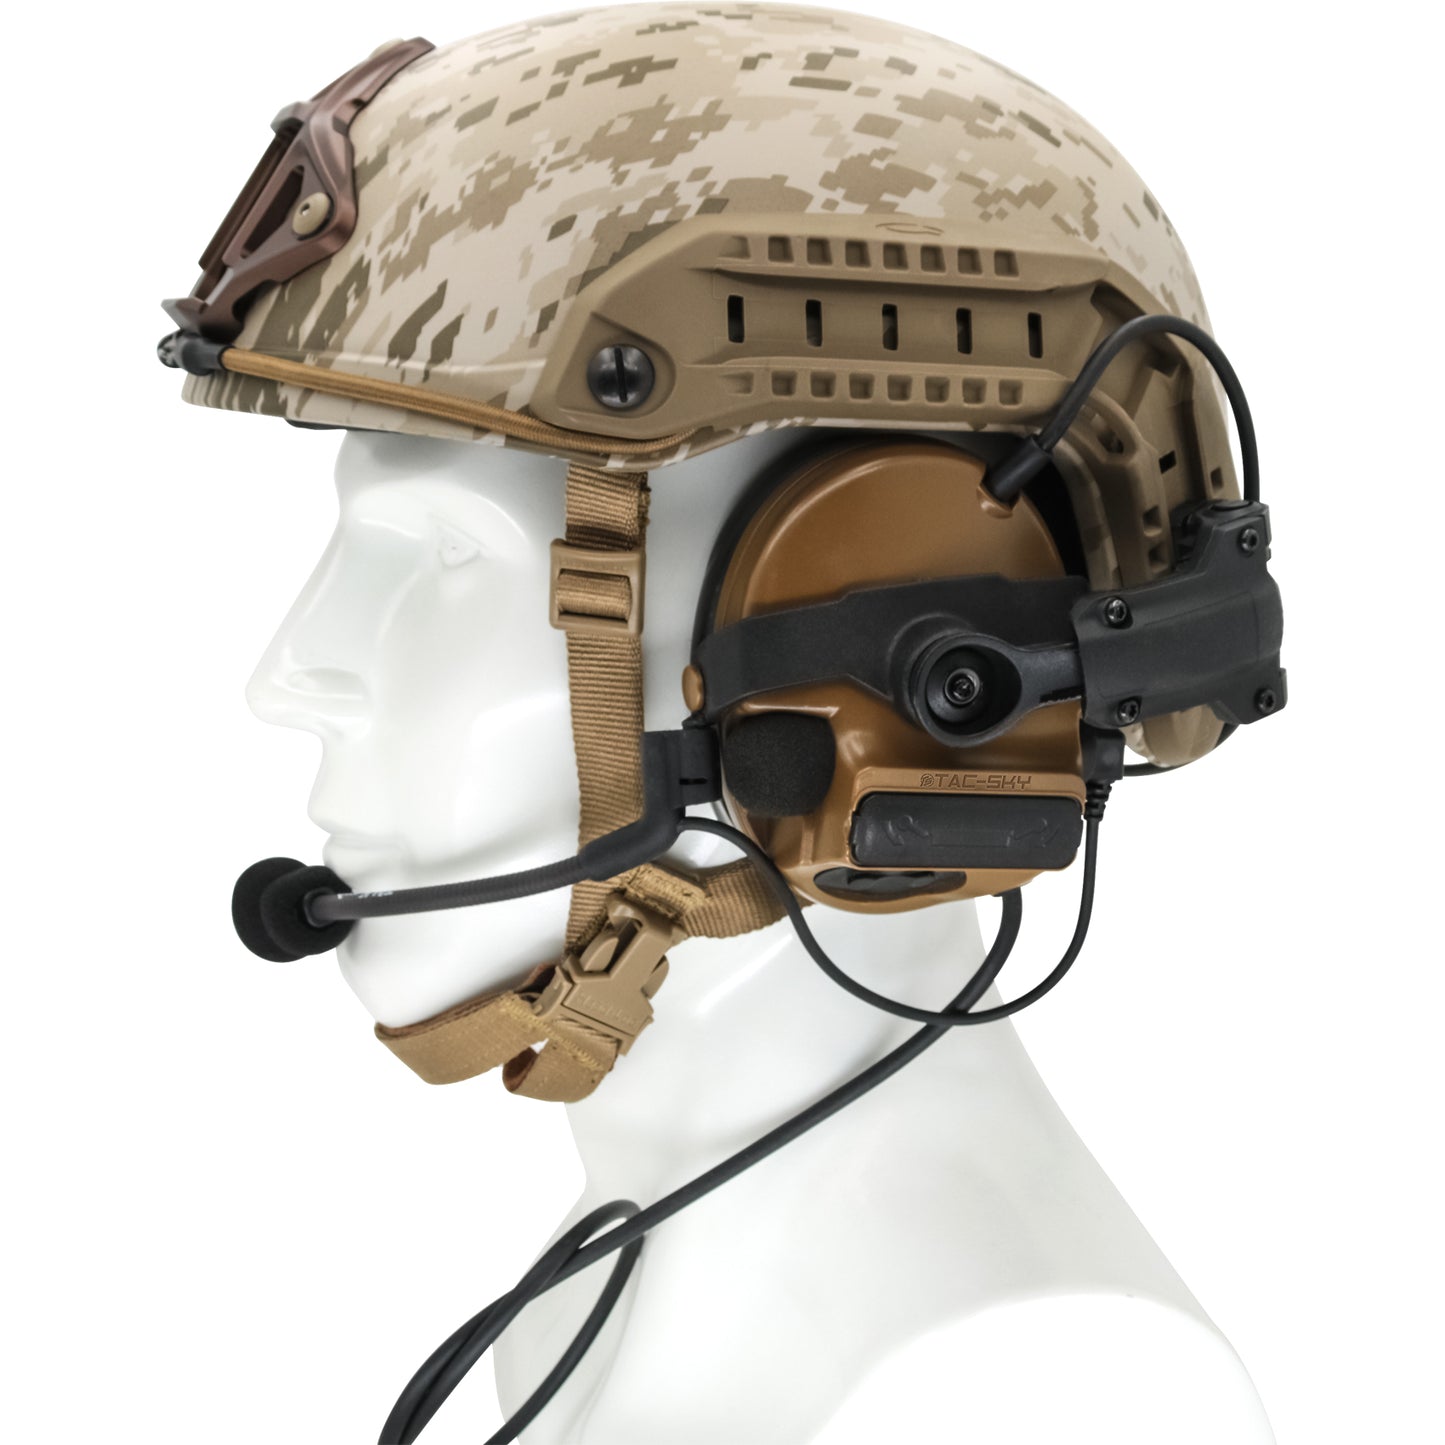 TAC-SKY C3 Tactical Headset Helmet Rail Adapter Version Noise Cancelling Headphones With U94 PTT Airsoft Hunting